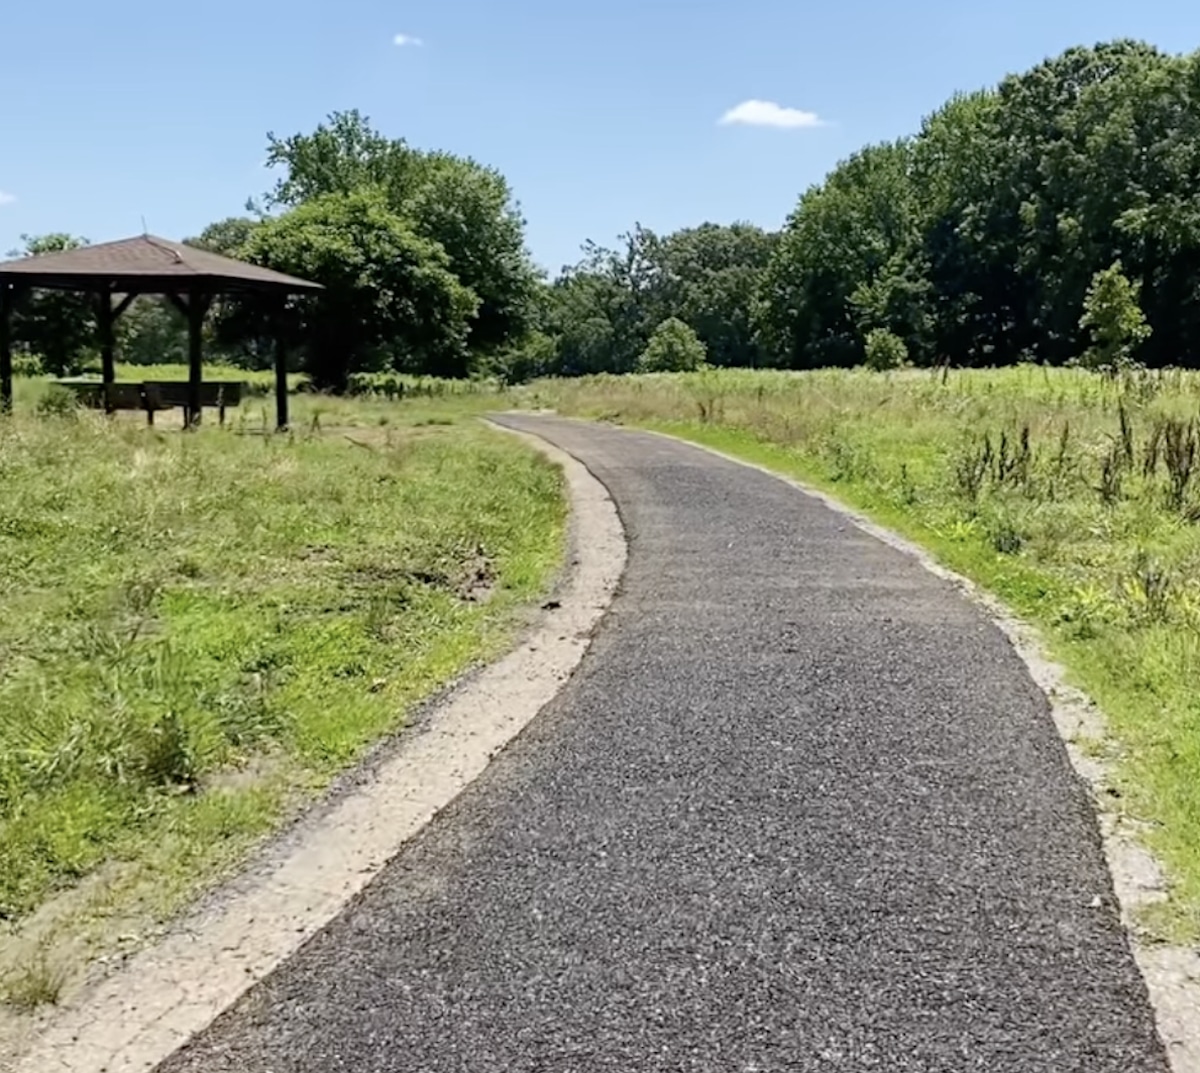 A new trail at T.O. Fuller State Park in Memphis, Tennessee is made from tires illegally dumped around the park.